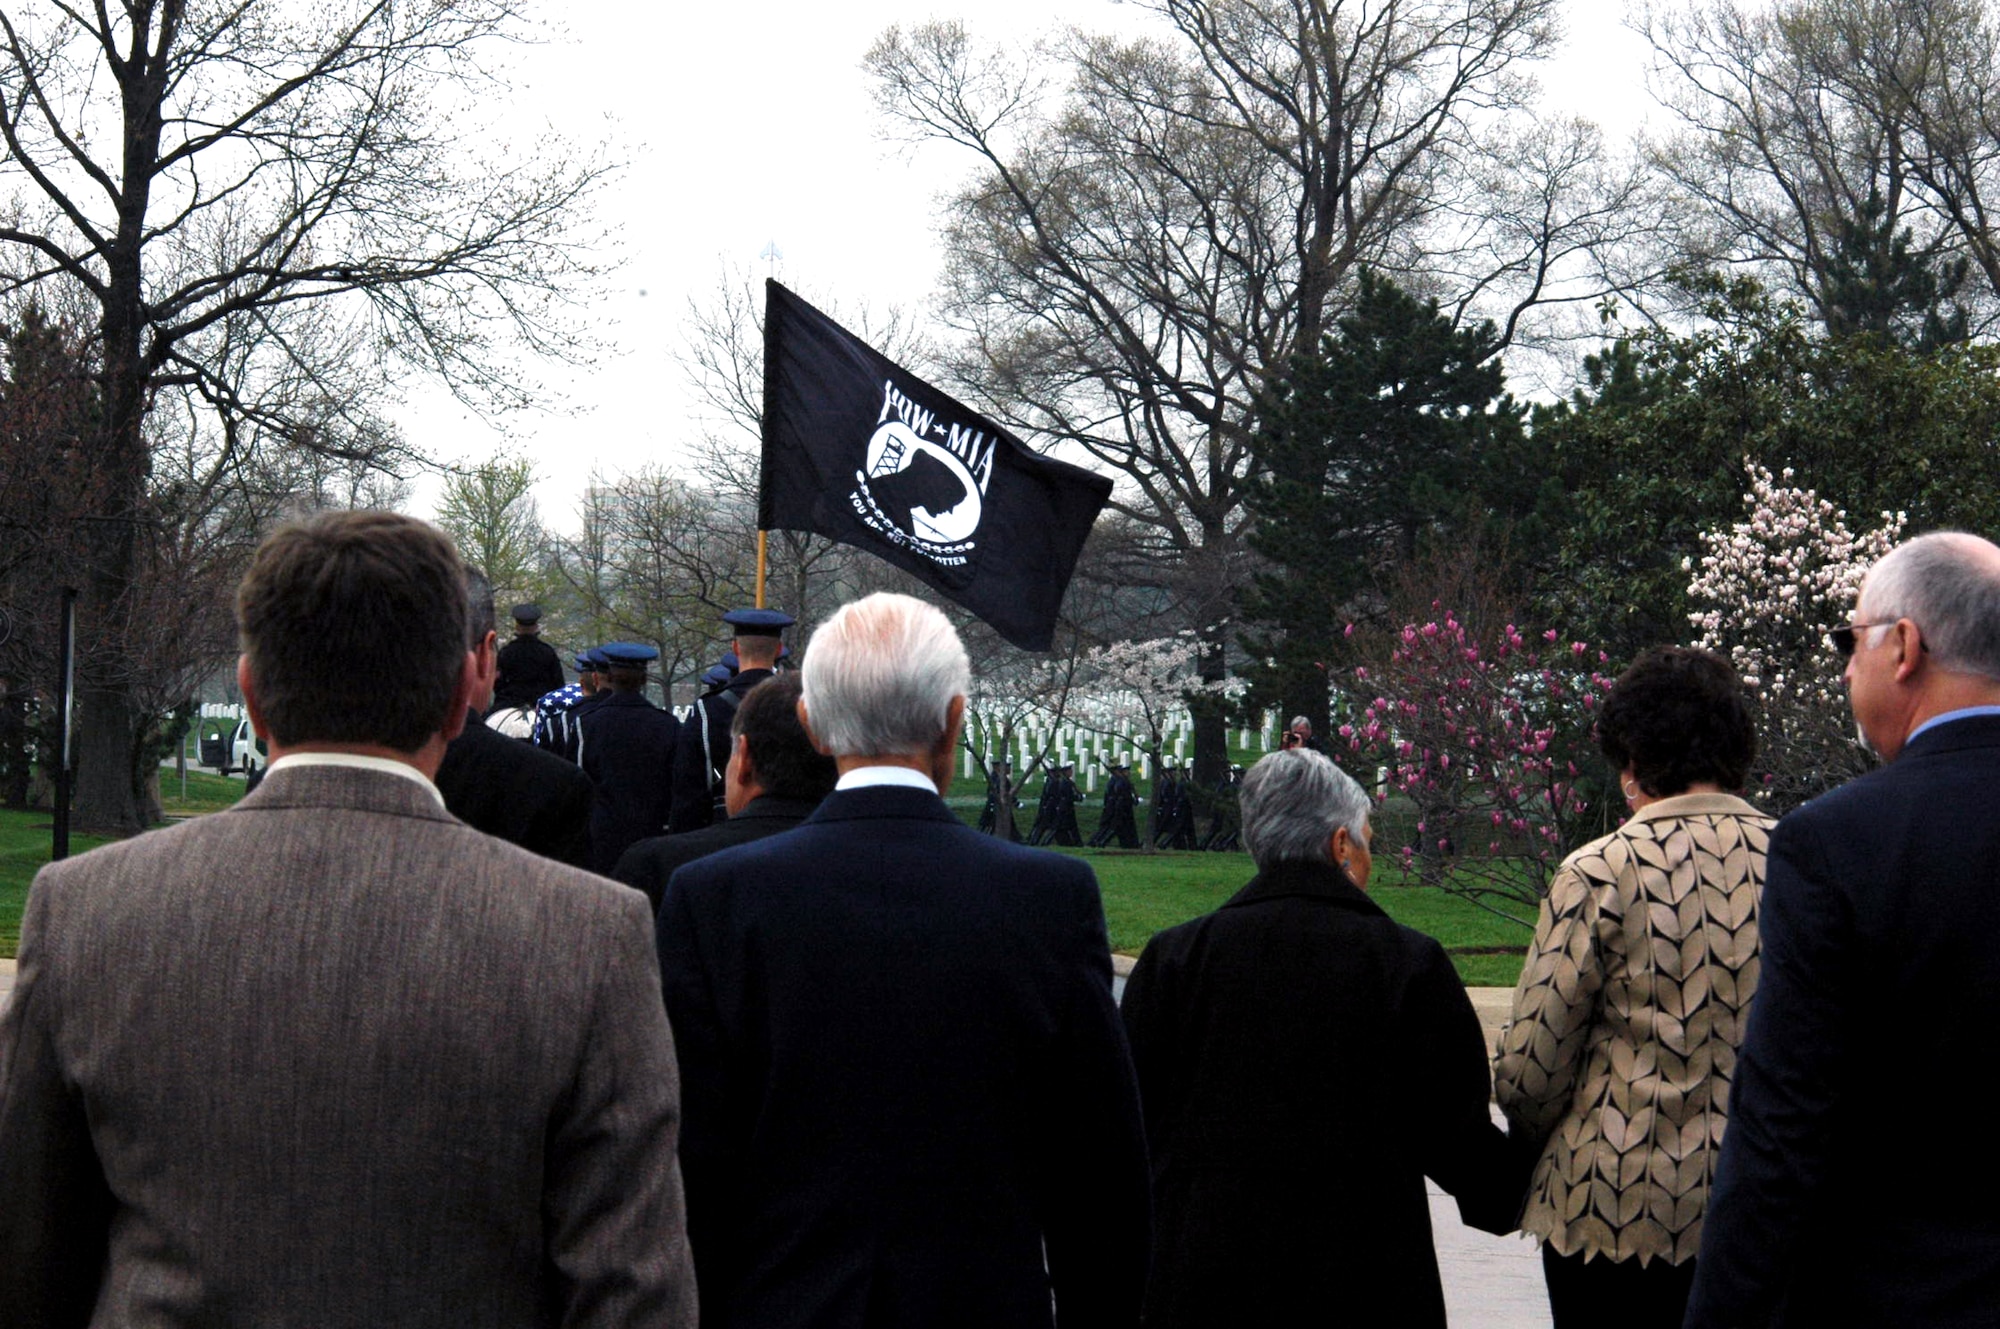 Family members of Maj. Robert F. Woods walk behind the horse-drawn caisson during the funeral for Major Woods at Arlington National Cemetery, Va., on April 9, 2008. This card was distributed by the family of Maj. Robert F. Woods during his funeral at Arlington National Cemetery on April 9, 2008.  On June 26, 1968, Major Woods disappeared in the Quang Binh Province in Vietnam after the 02-A Skymaster he was flying crashed in a remote mountainous region.  A native of Salt Lake City, Utah, Major Woods was in the military for 20 years when he disappeared. His career began in June 1948 as an enlisted aircrew member on a C-74 Globemaster in the Berlin Airlift.  In 1951 he became an officer and a pilot flying KC-97 Stratotankers in the Korean Conflict.  In Vietnam, he served as a forward air controller in the Skymaster with the 20th Tactical Air Support Squadron in DaNang Air Base, South Vietnam. He earned his first of eight Air Medals in Korea and also earned the Distinguished Flying Cross and Bronze Star for his service in Vietnam.  On April 9 he was laid to rest at Arlington nearly 40 years after he disappeared.  (U.S. Air Force Photo/Tech. Sgt. Scott T. Sturkol)  